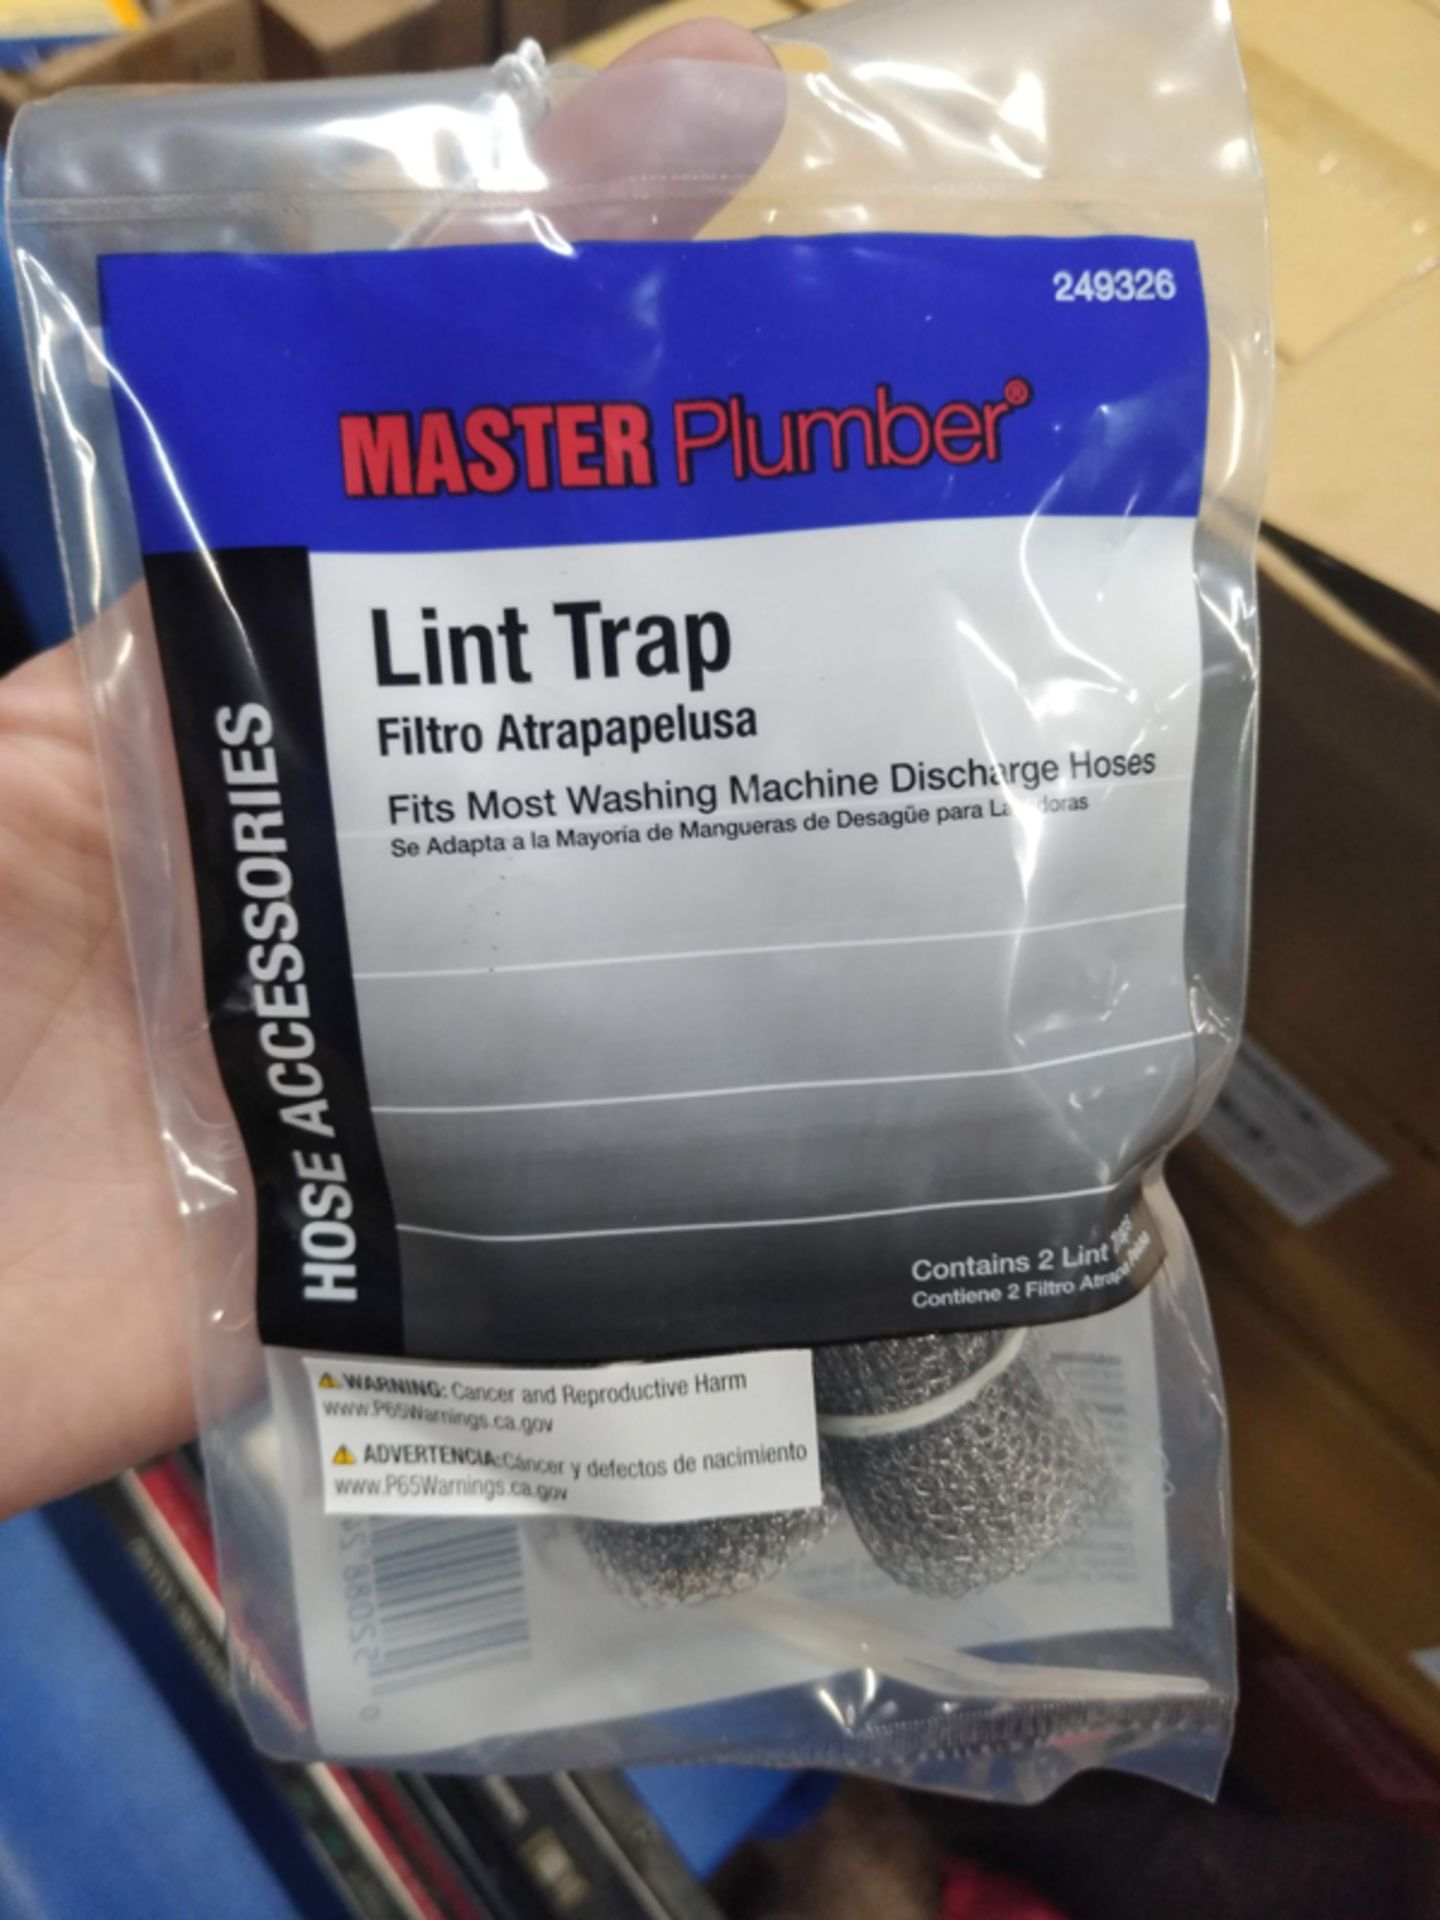 LOT OF 300 NEW IN PACKAGE MASTER PLUMBER LINT TRAPS - Image 6 of 10